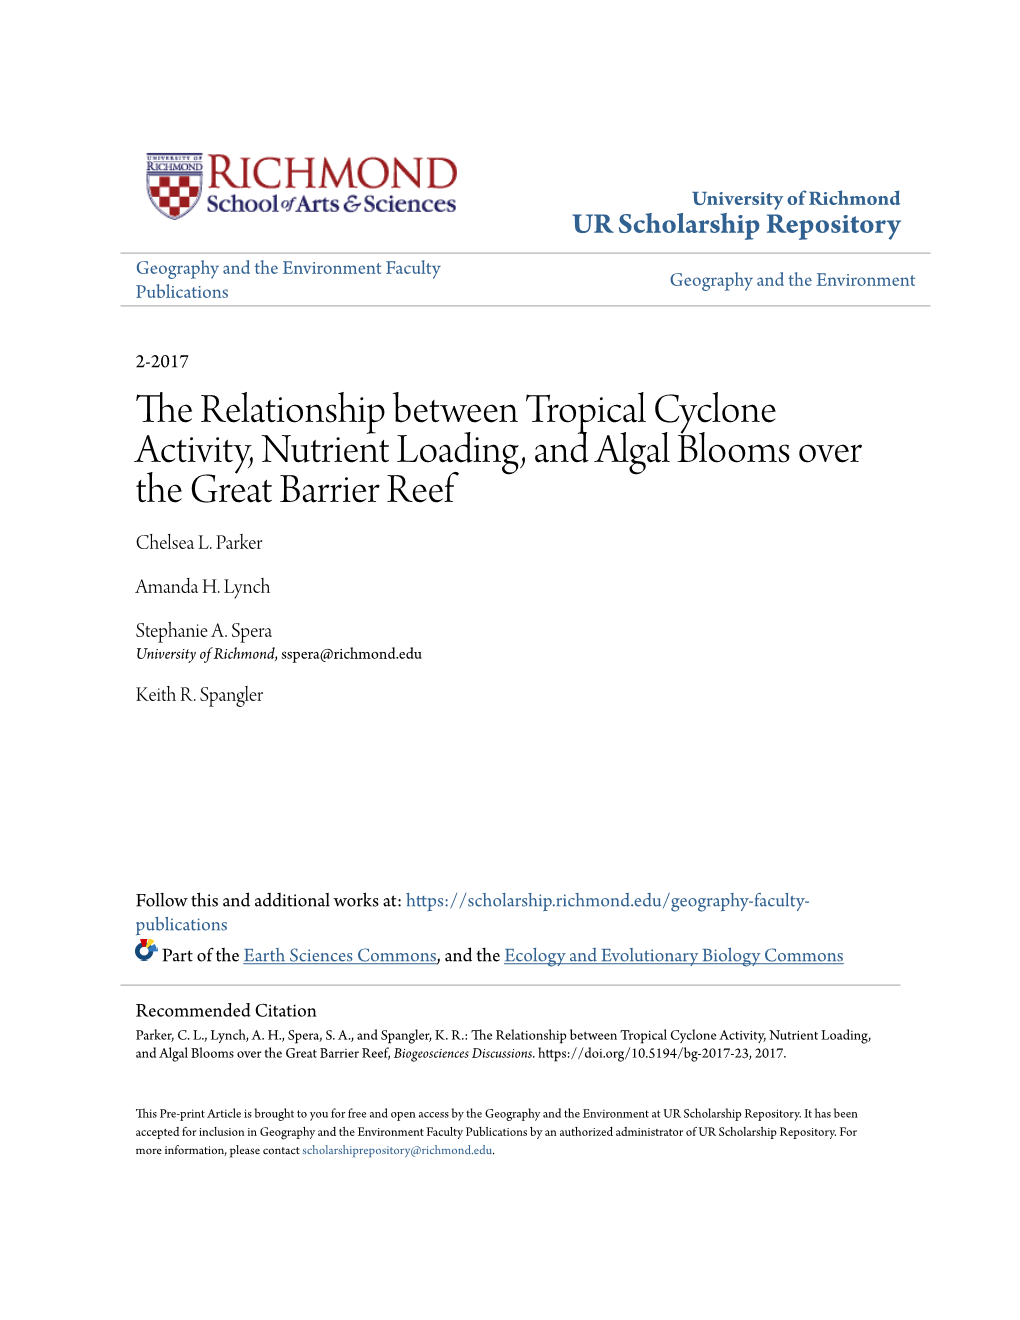 The Relationship Between Tropical Cyclone Activity, Nutrient Loading, and Algal Blooms Over the Great Barrier Reef Chelsea L